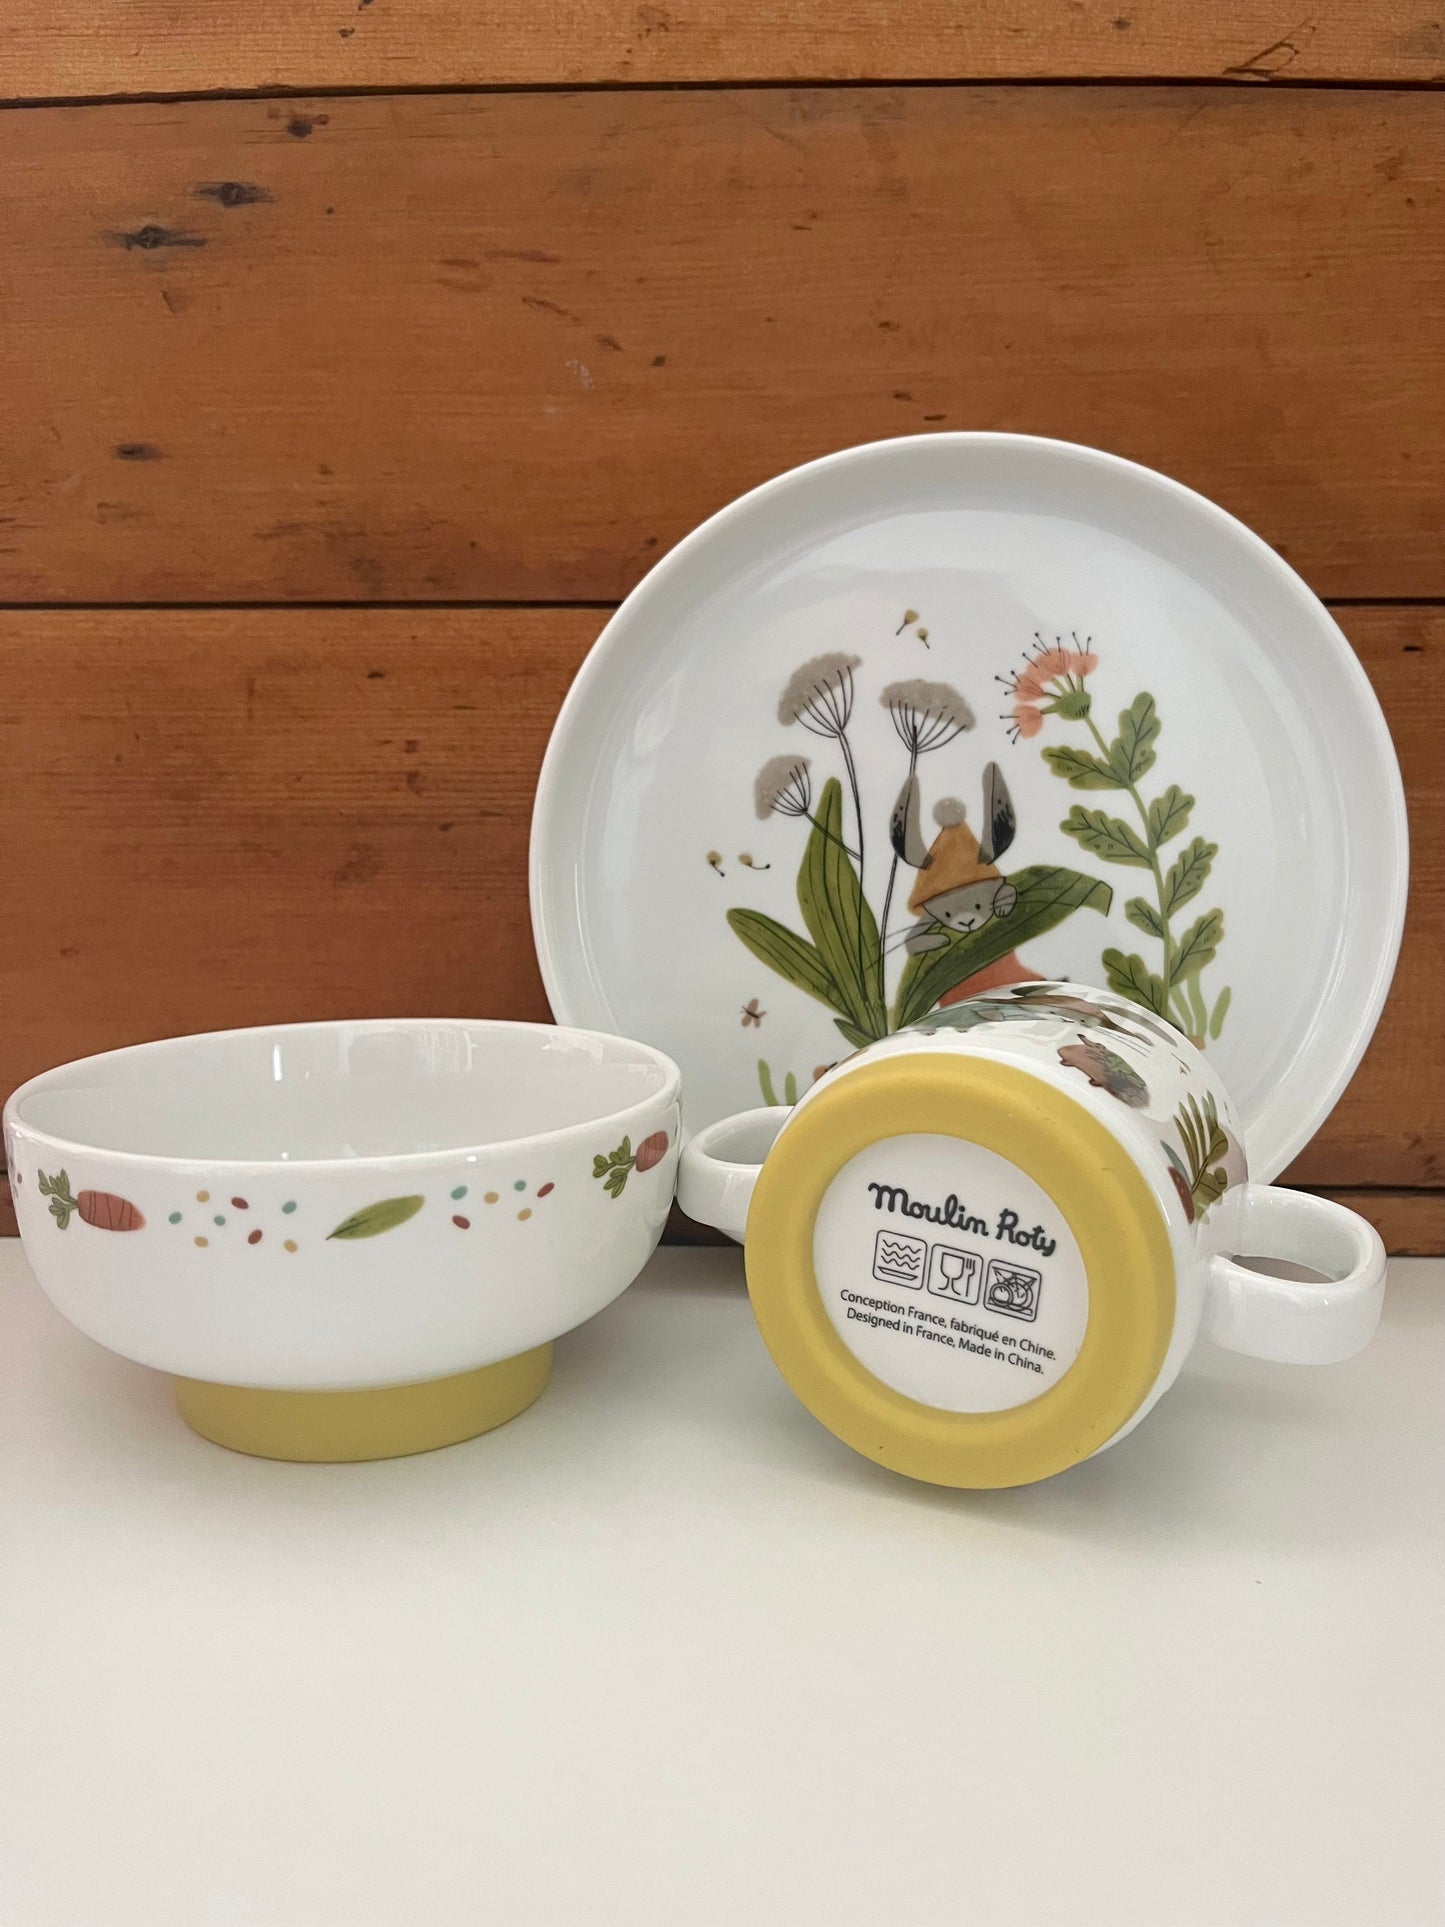 Porcelain DISH SET for Baby - THREE LITTLE RABBITS, 3 pieces